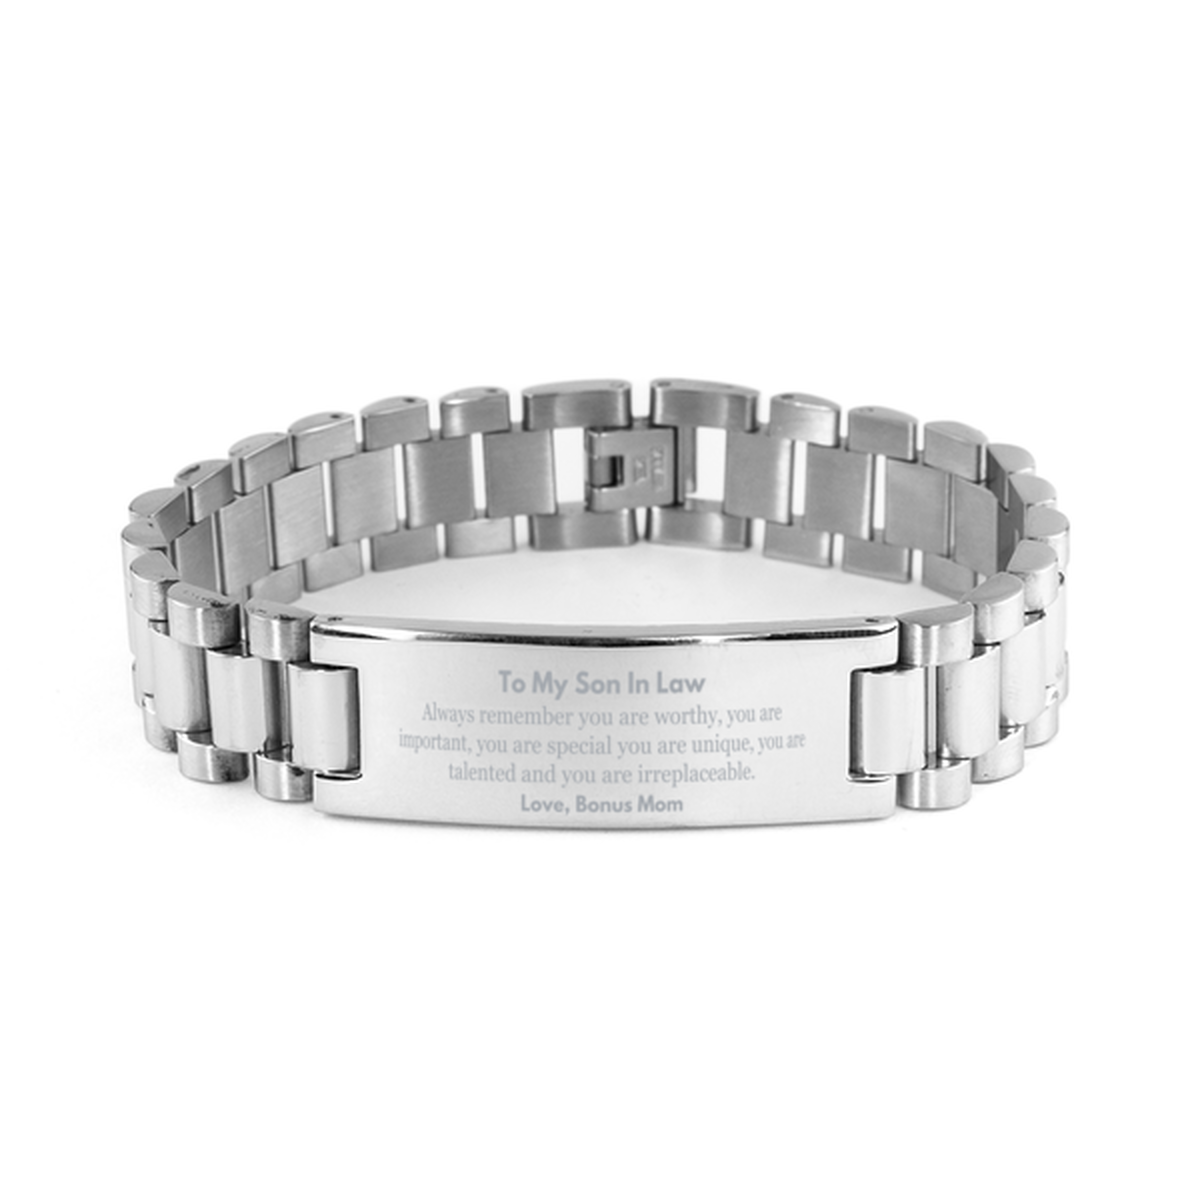 Son In Law Birthday Gifts from Bonus Mom, Inspirational Ladder Stainless Steel Bracelet for Son In Law Christmas Graduation Gifts for Son In Law Always remember you are worthy, you are important. Love, Bonus Mom